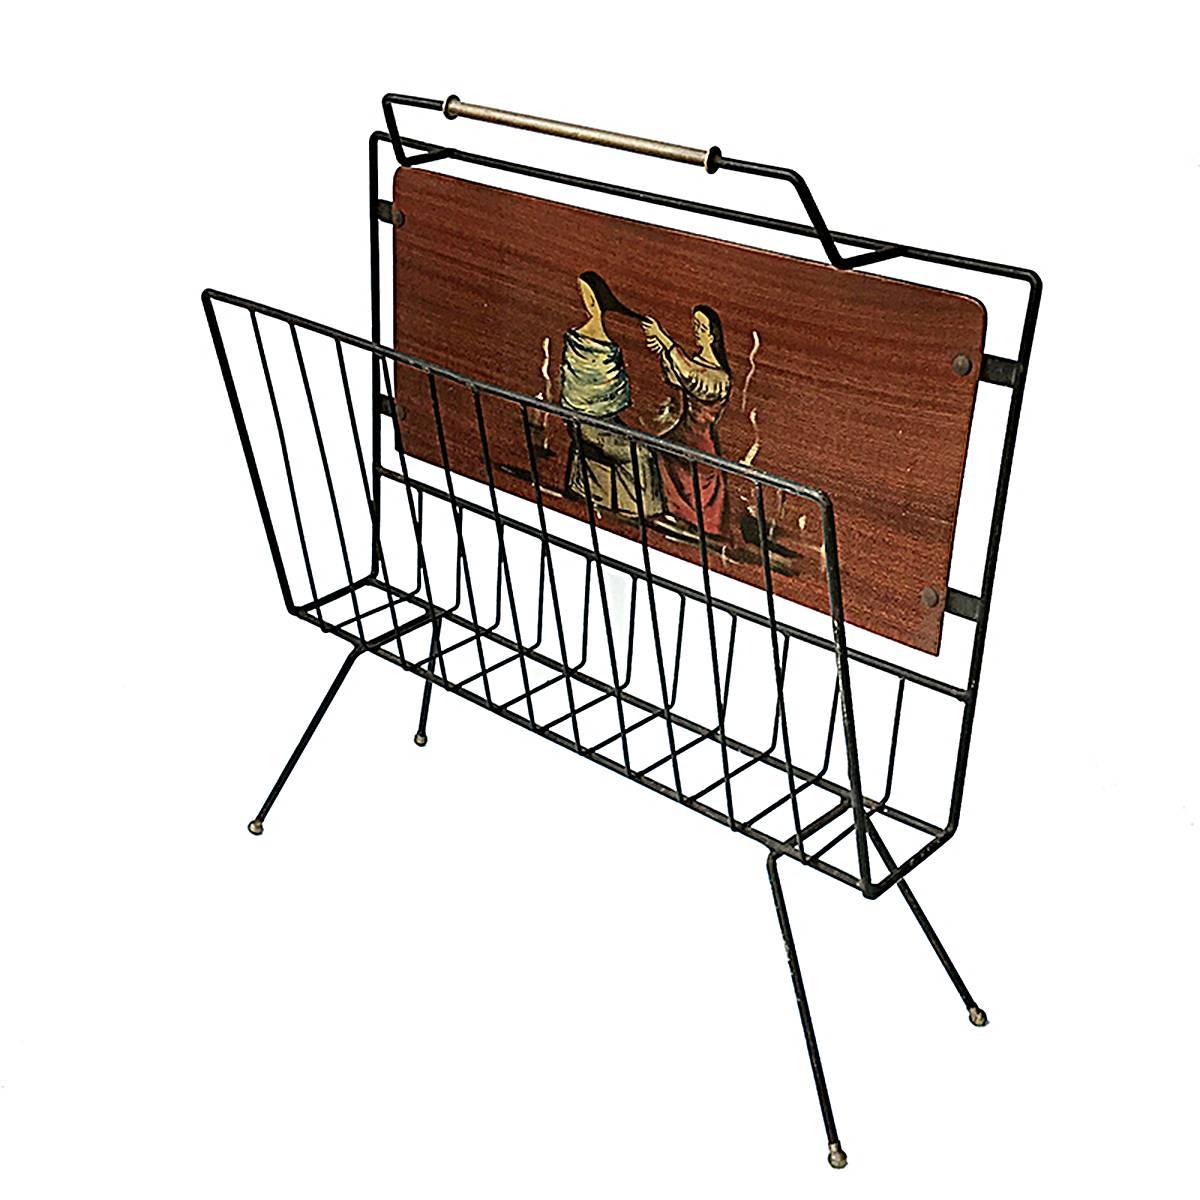 Italian Magazine Rack the Enameled Iron and Painted Wood, 1950s For Sale